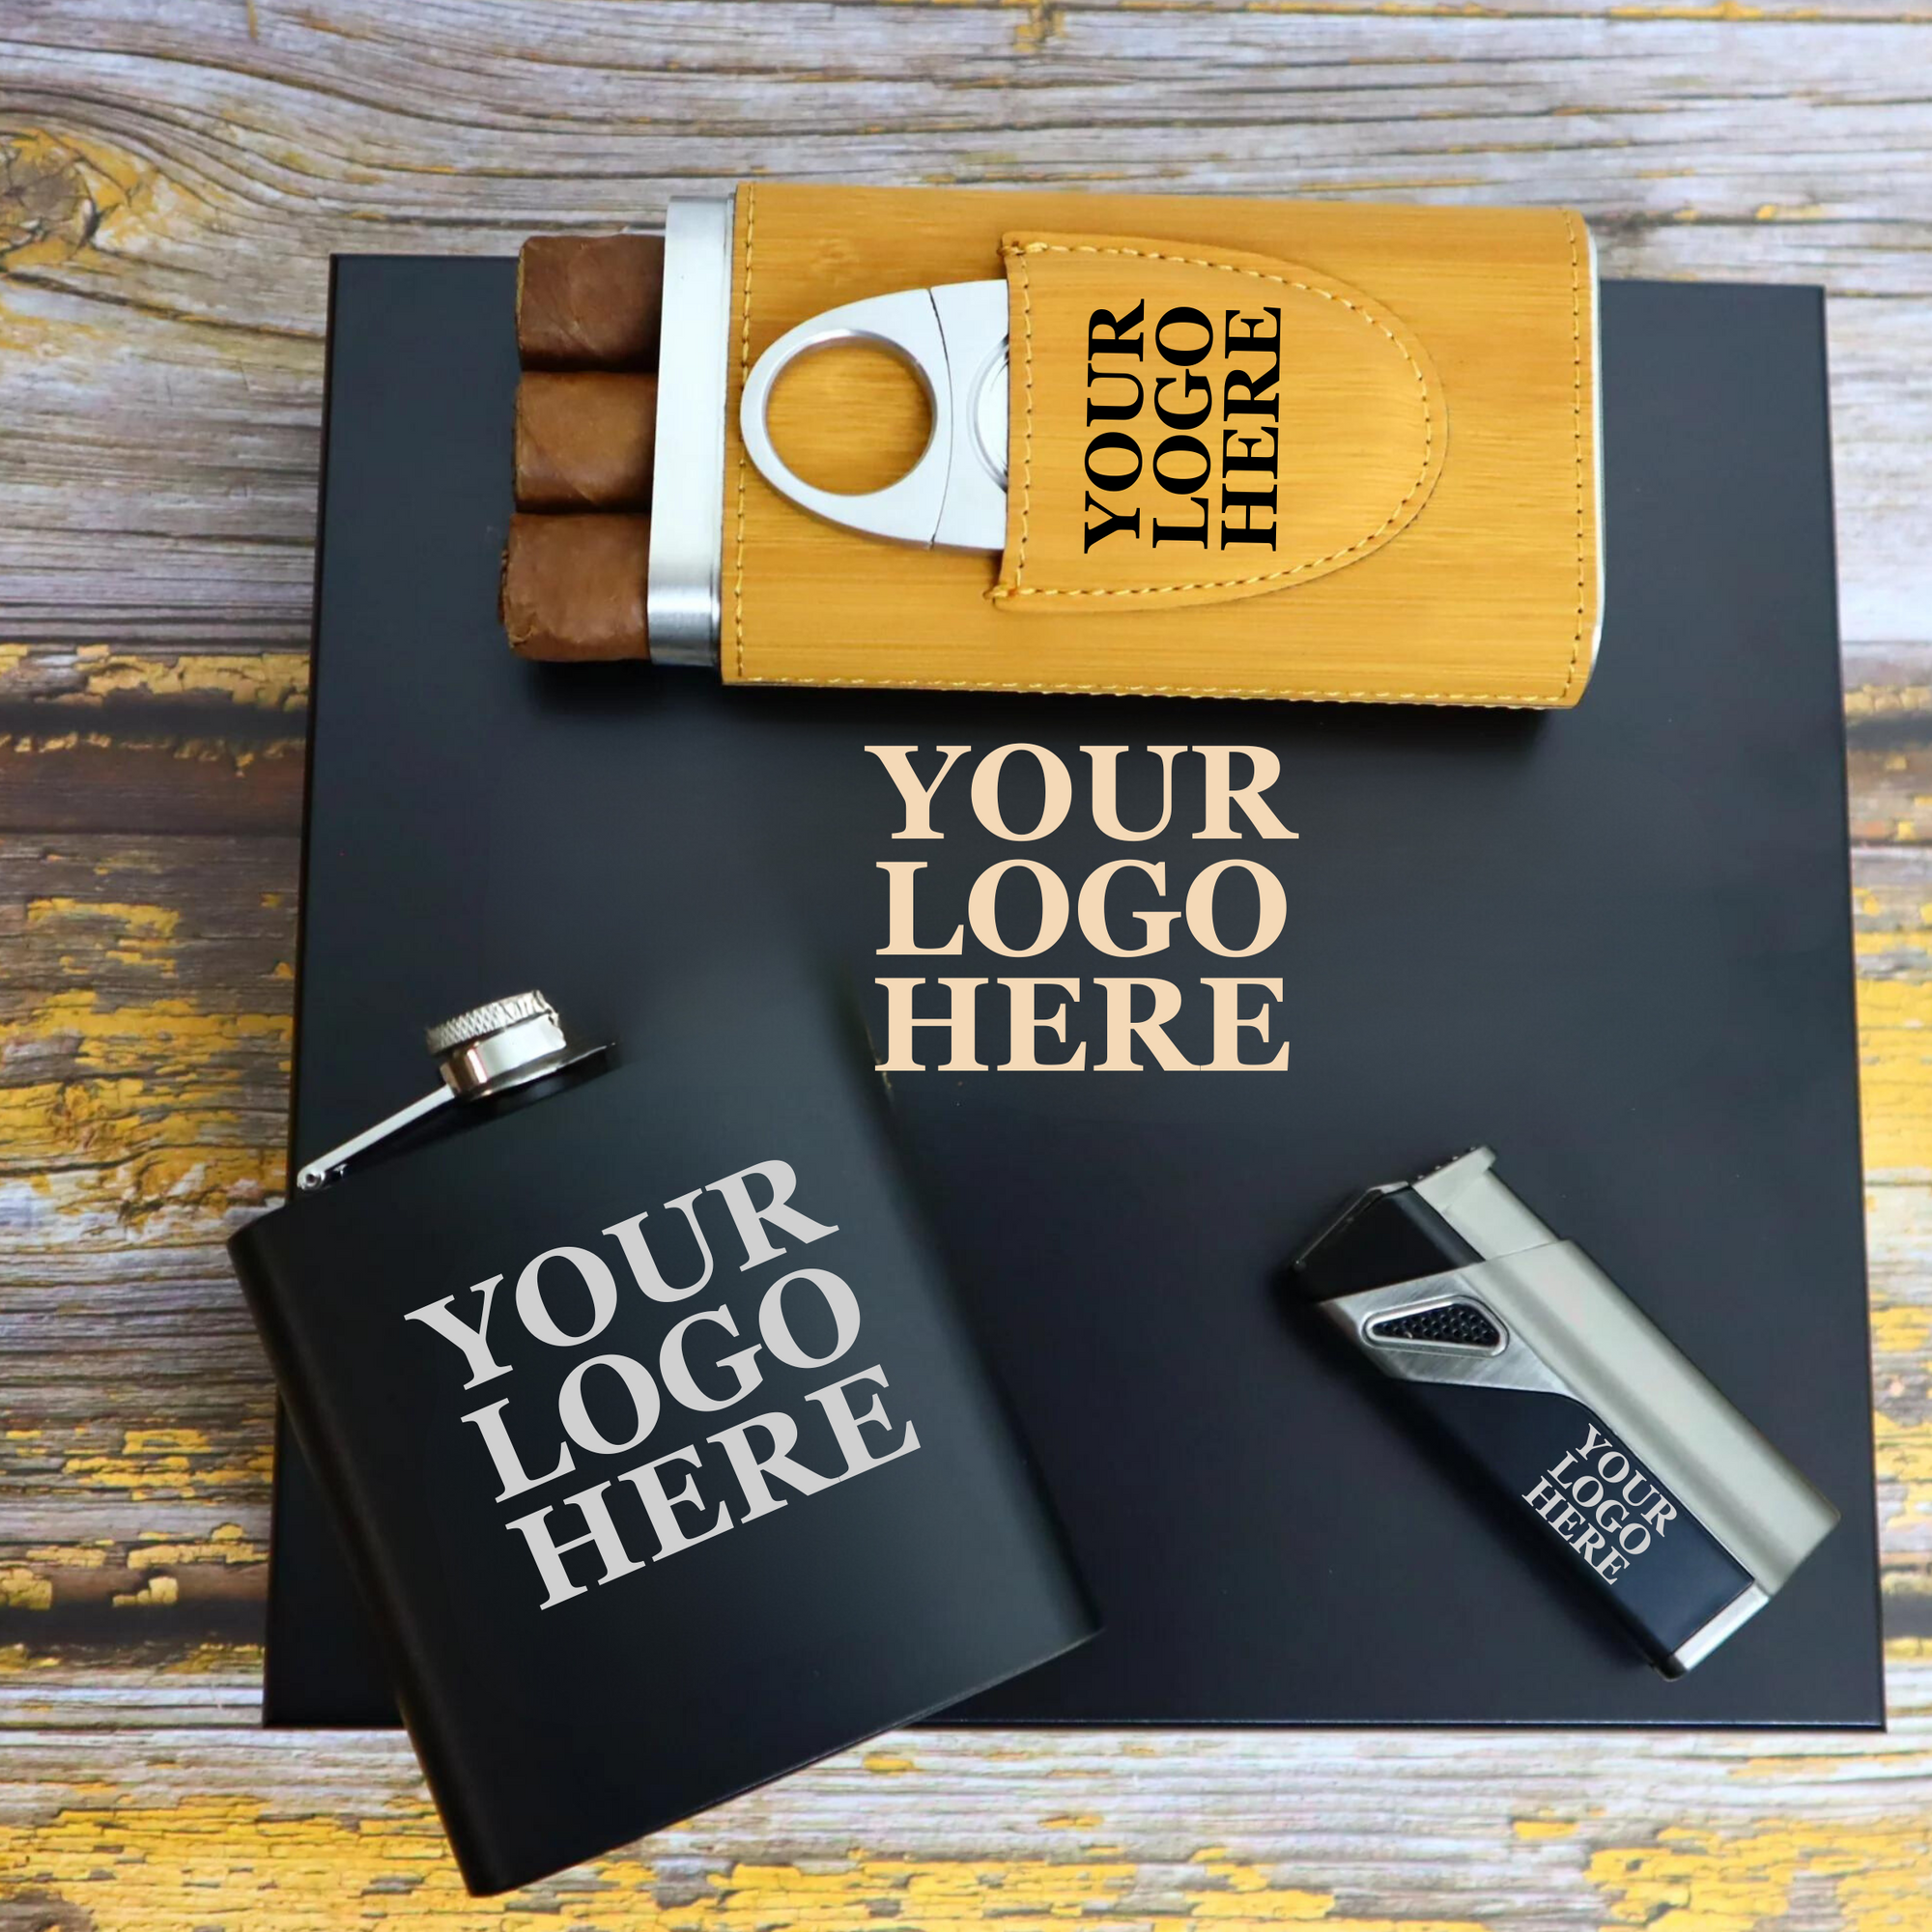 truck driver gifts Archives - Blog: Perfect Imprints Creative Marketing